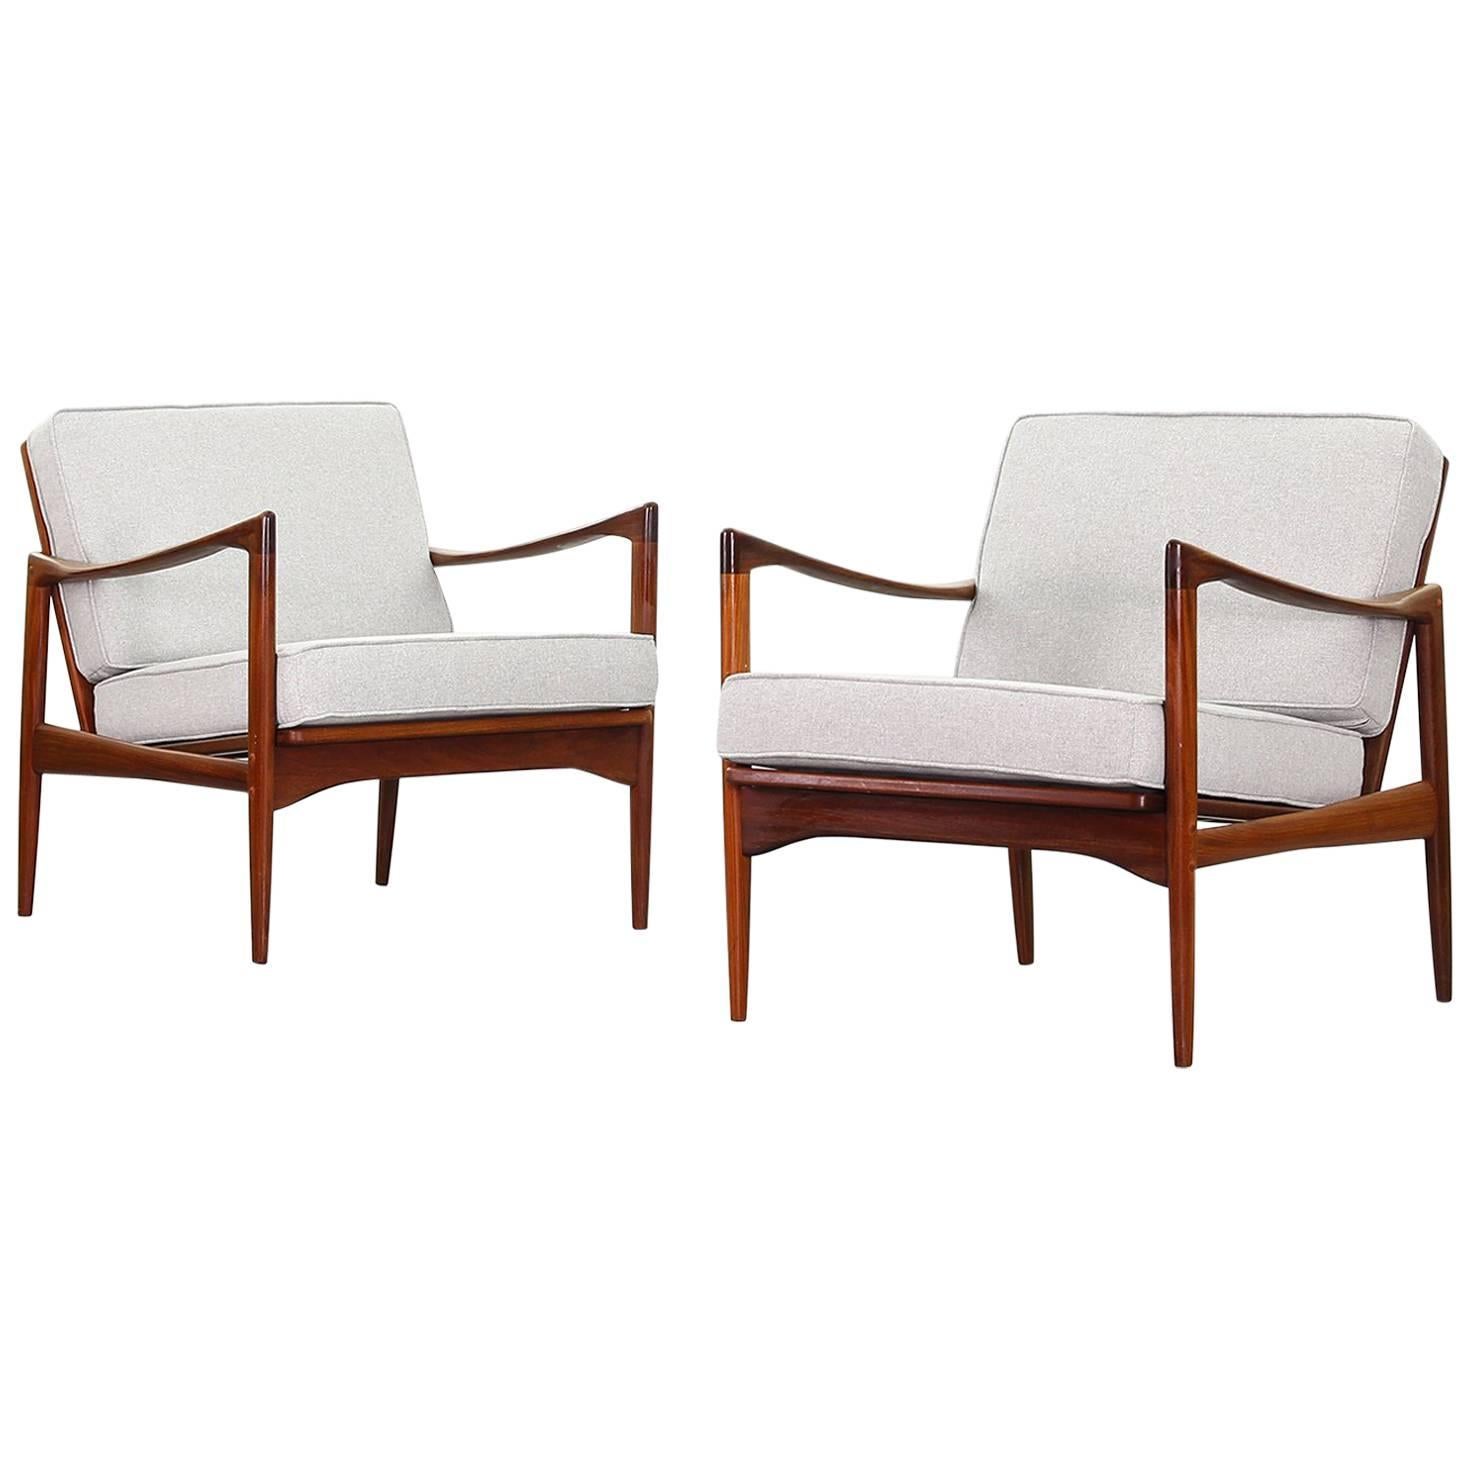 Pair of Lounge Chairs by Ib Kofod-Larsen for OPE, Newly Reupholstered